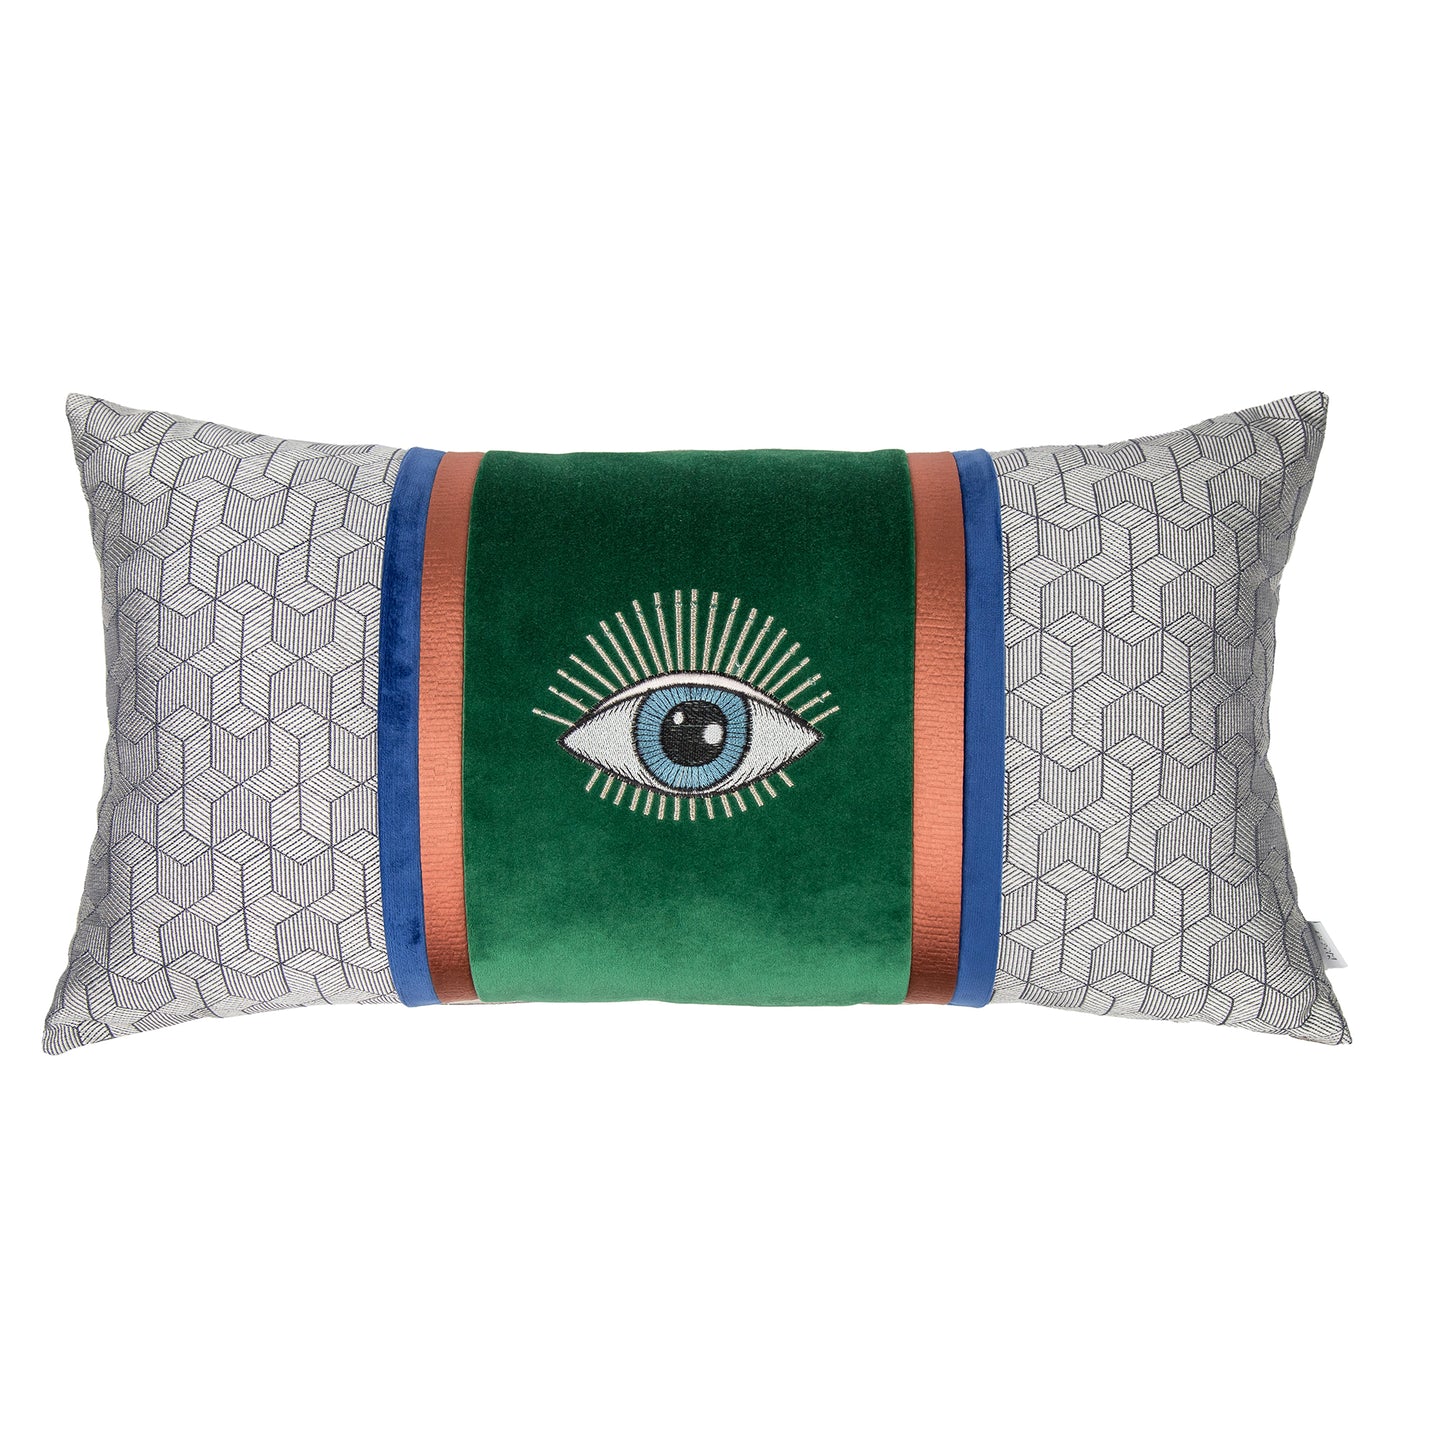 GEOMETRIC PATTERENED RECTANGLE PILLOW